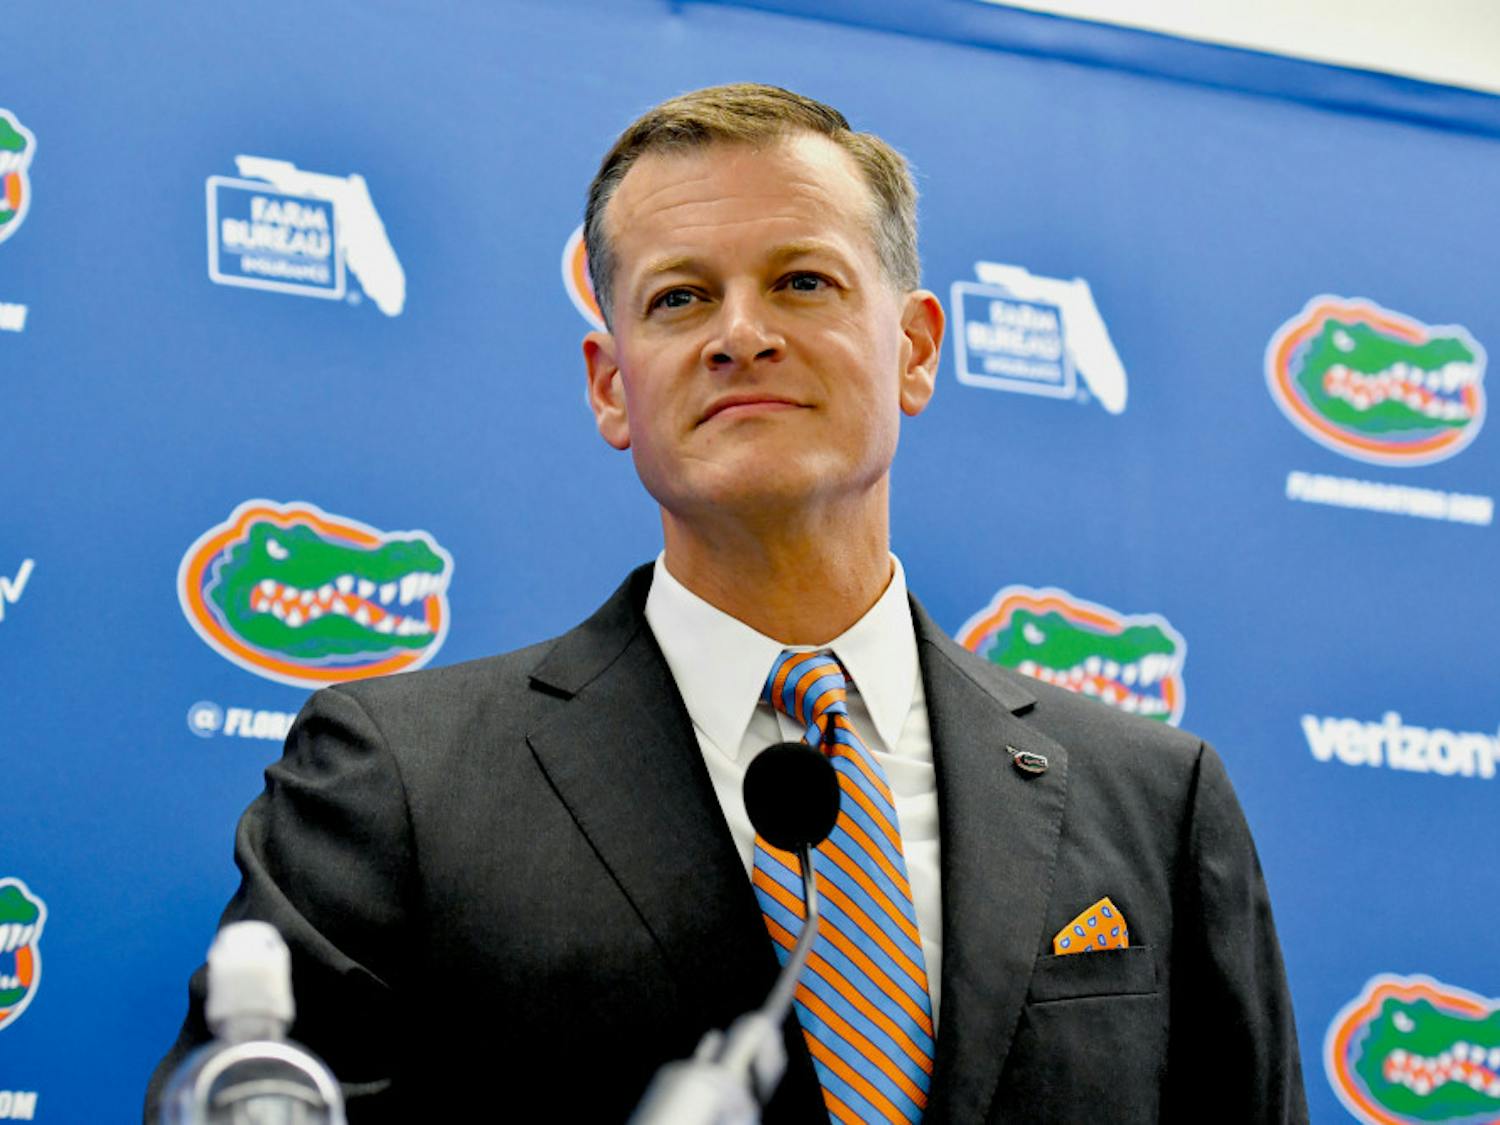 Florida Athletic Director Scott Stricklin addressed the abuse allegations surrounding former women's basketball coach Cameron Newbauer Monday.